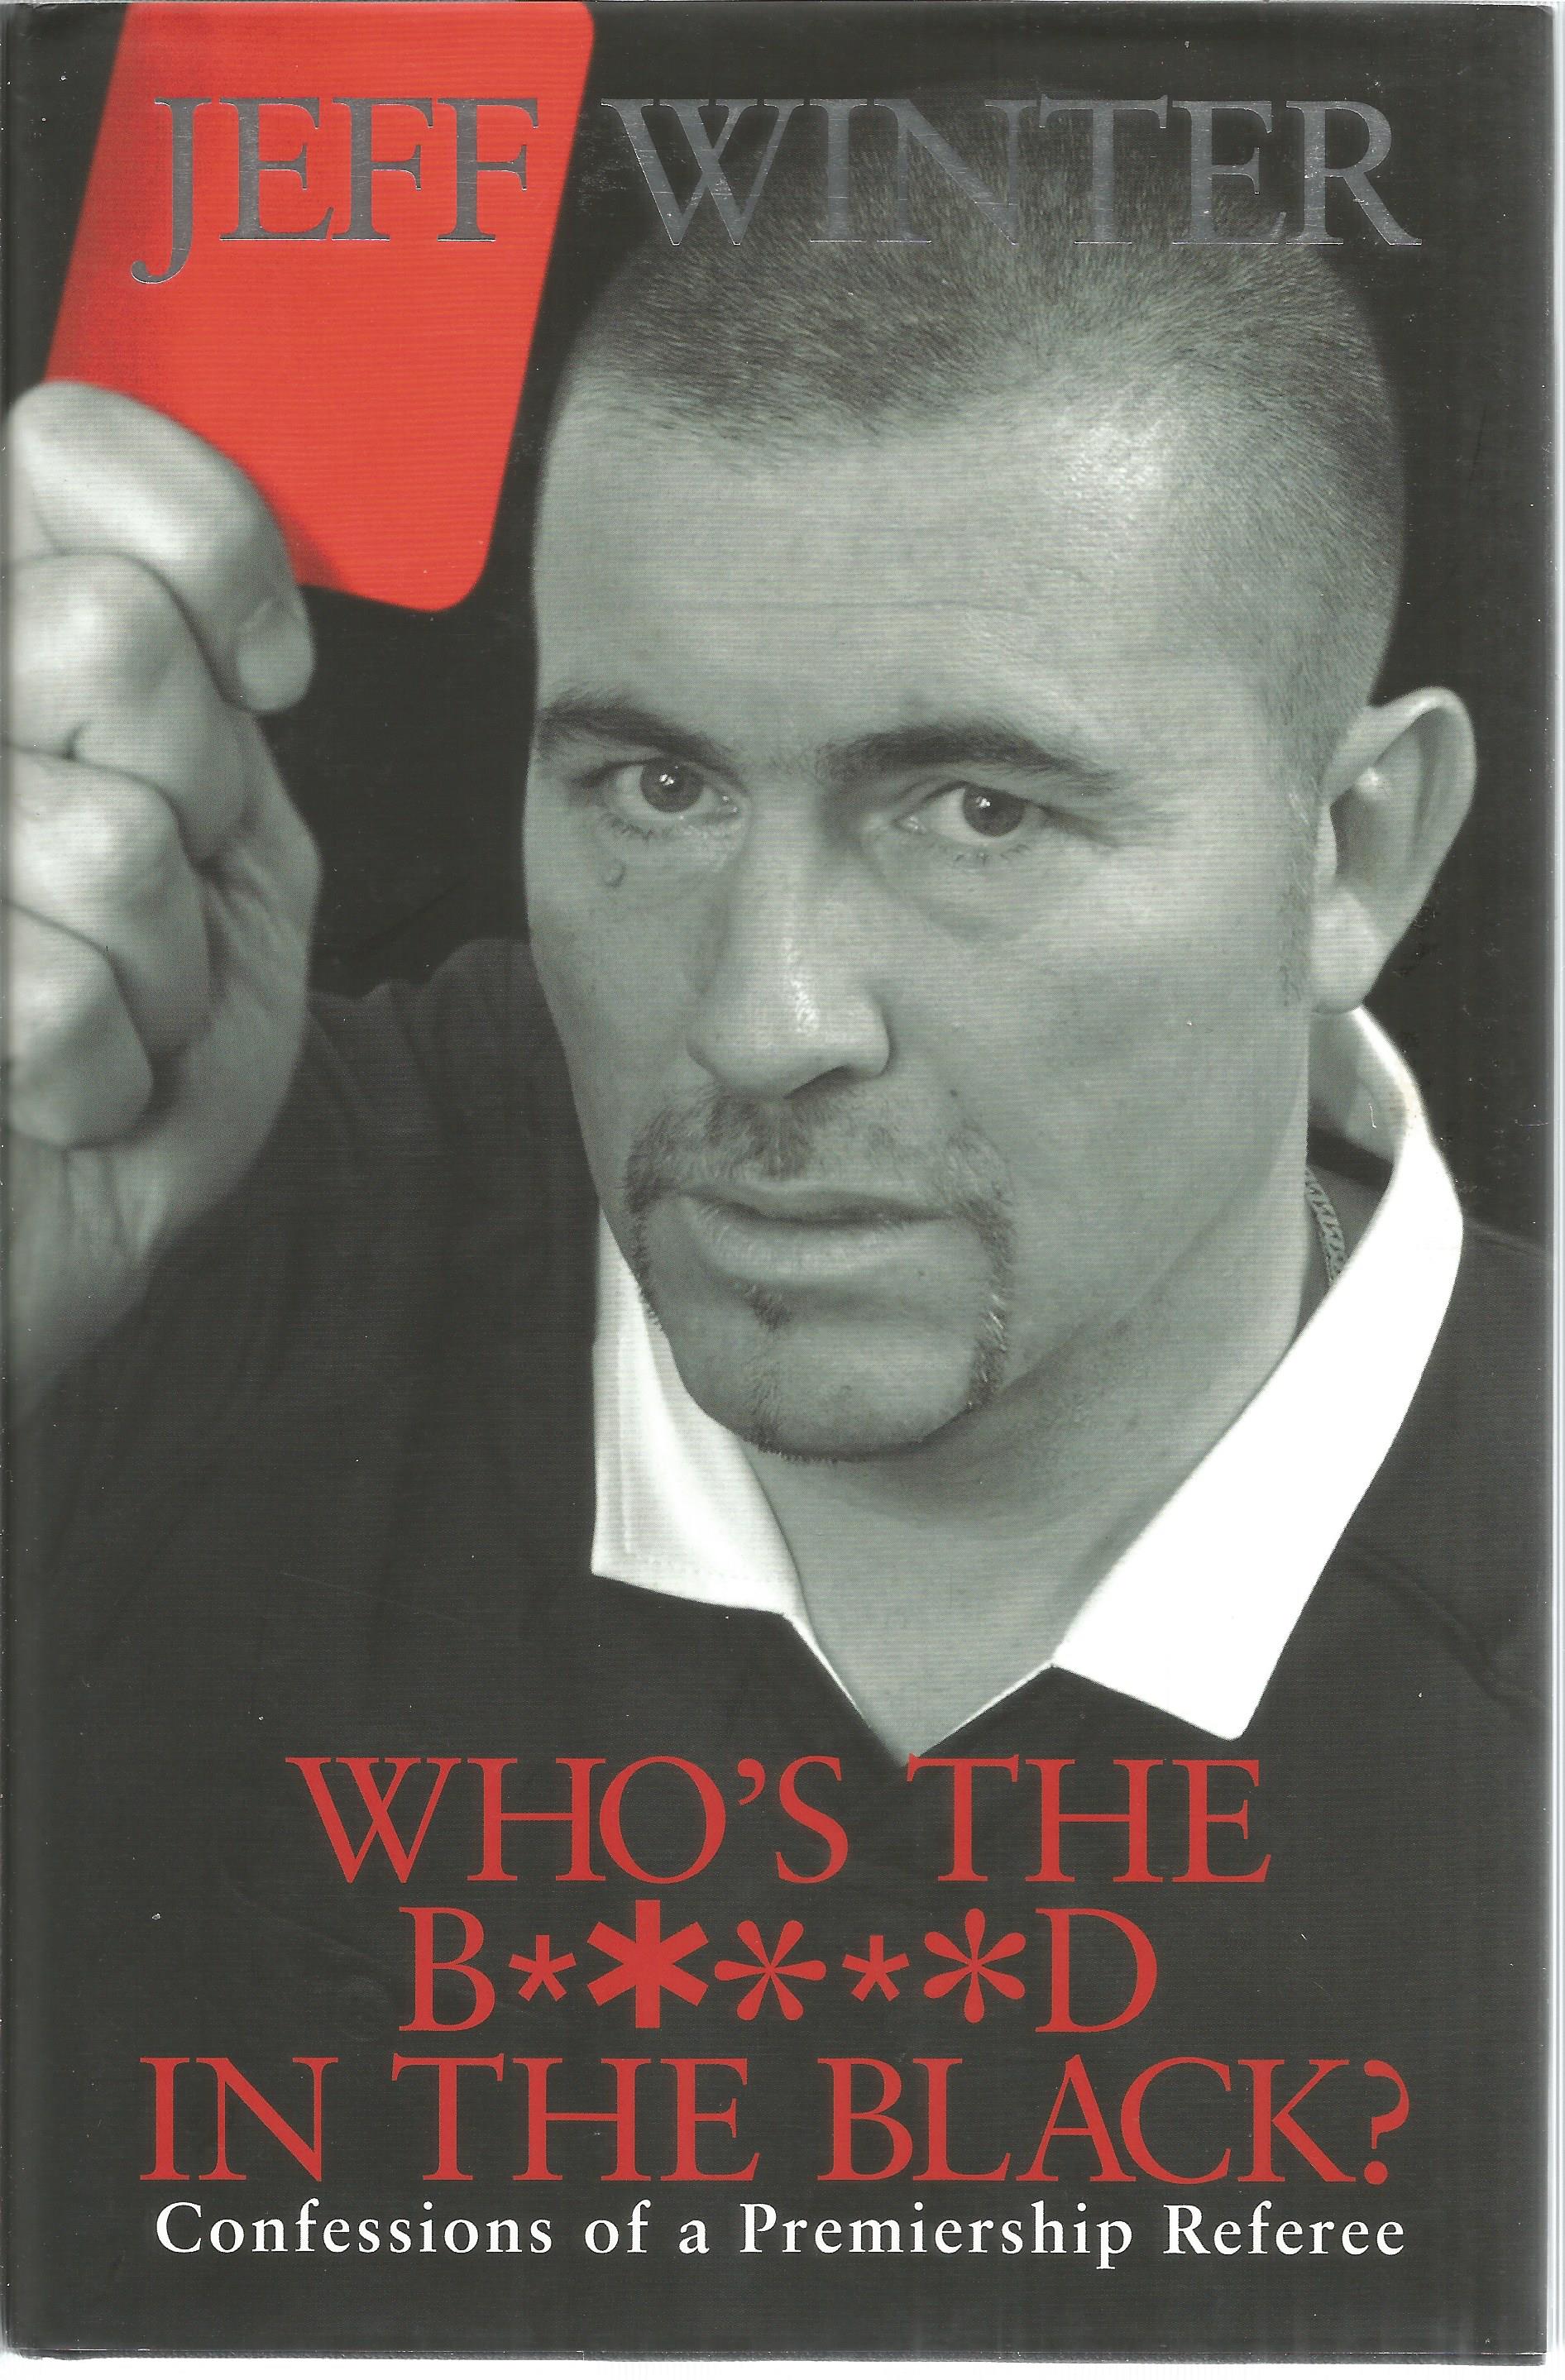 Jeff Winter signed hardback book titled Whos The B****D in the Black Confessions of a Premiership